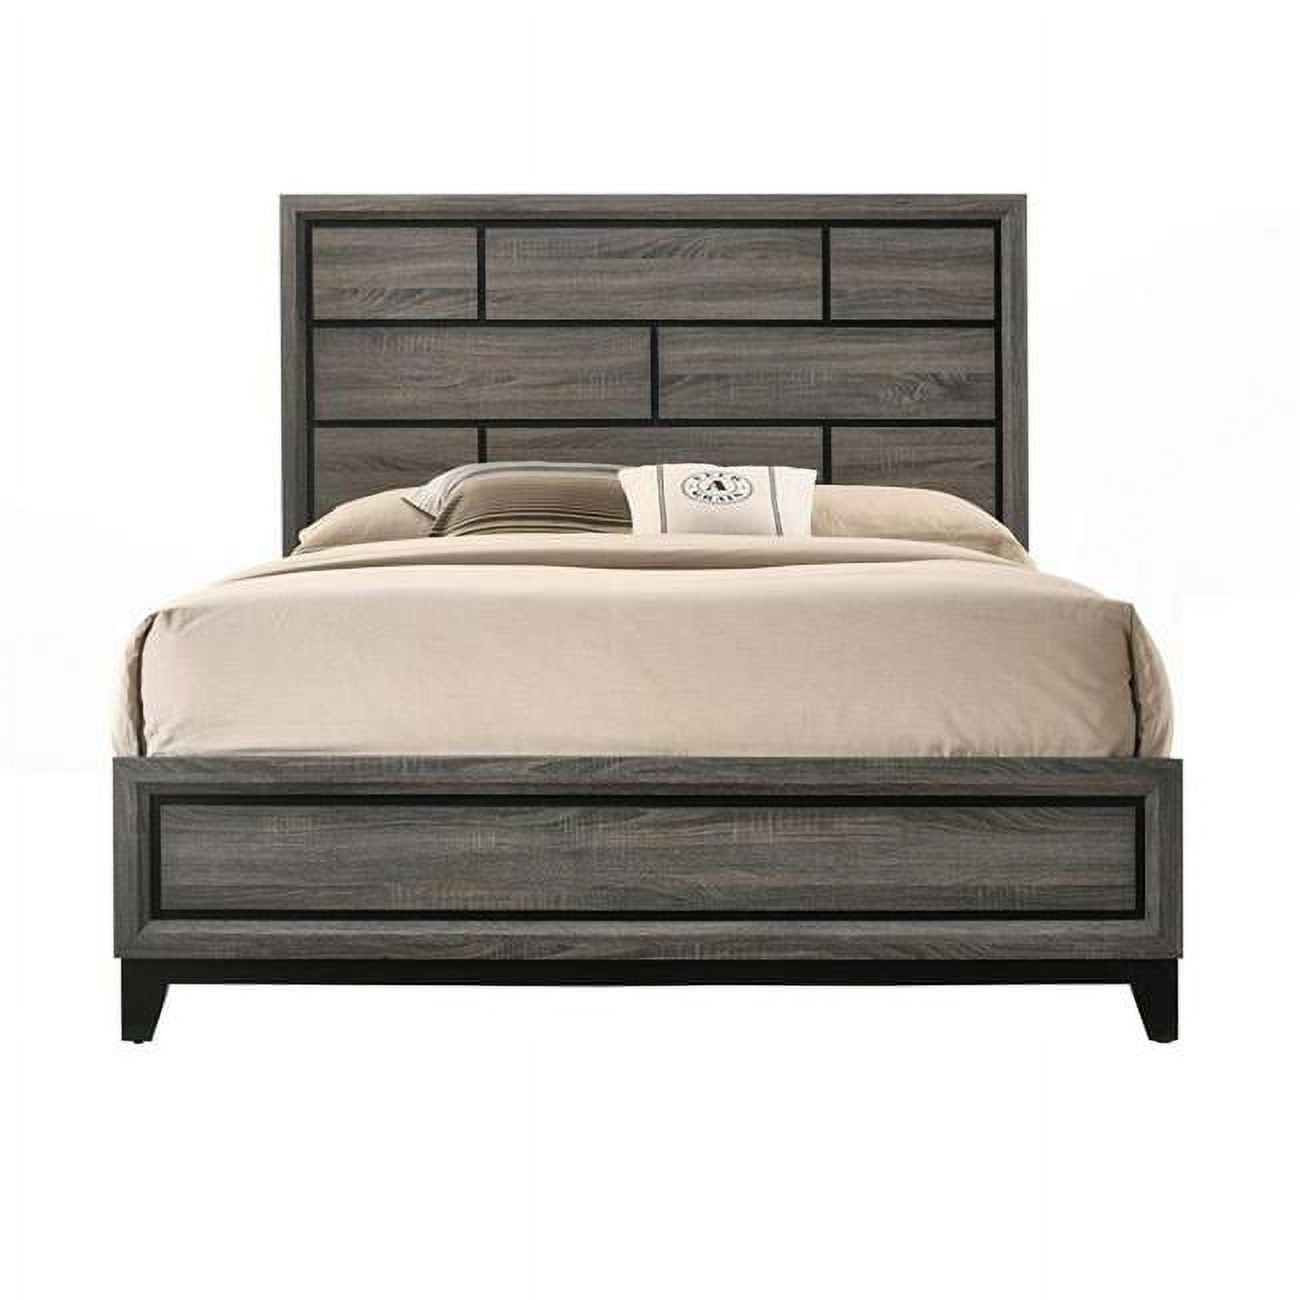 BM196932 Transitional Style Wooden Queen Size Bed with Brick Elements Panel Headboard, Gray -  Benzara